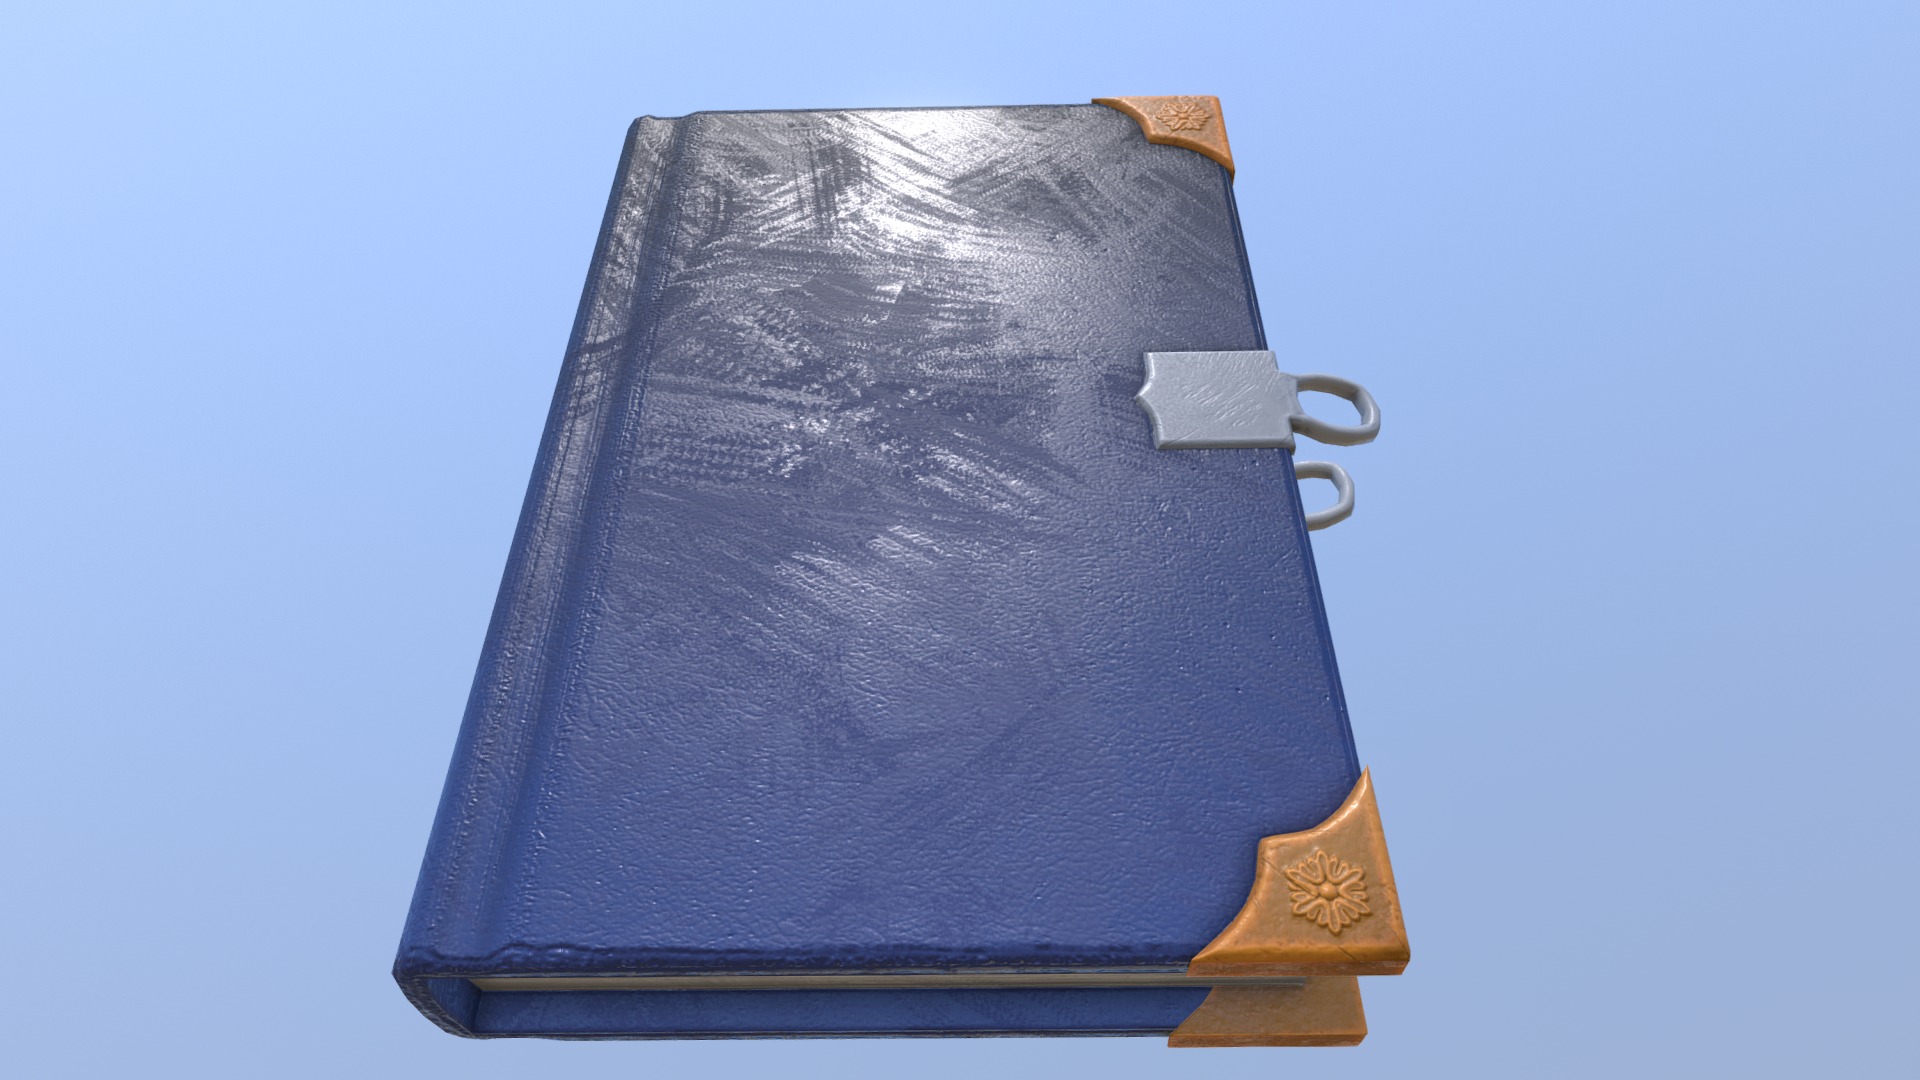 3D model Dairy - This is a 3D model of the Dairy. The 3D model is about a blue book with a gold ring.